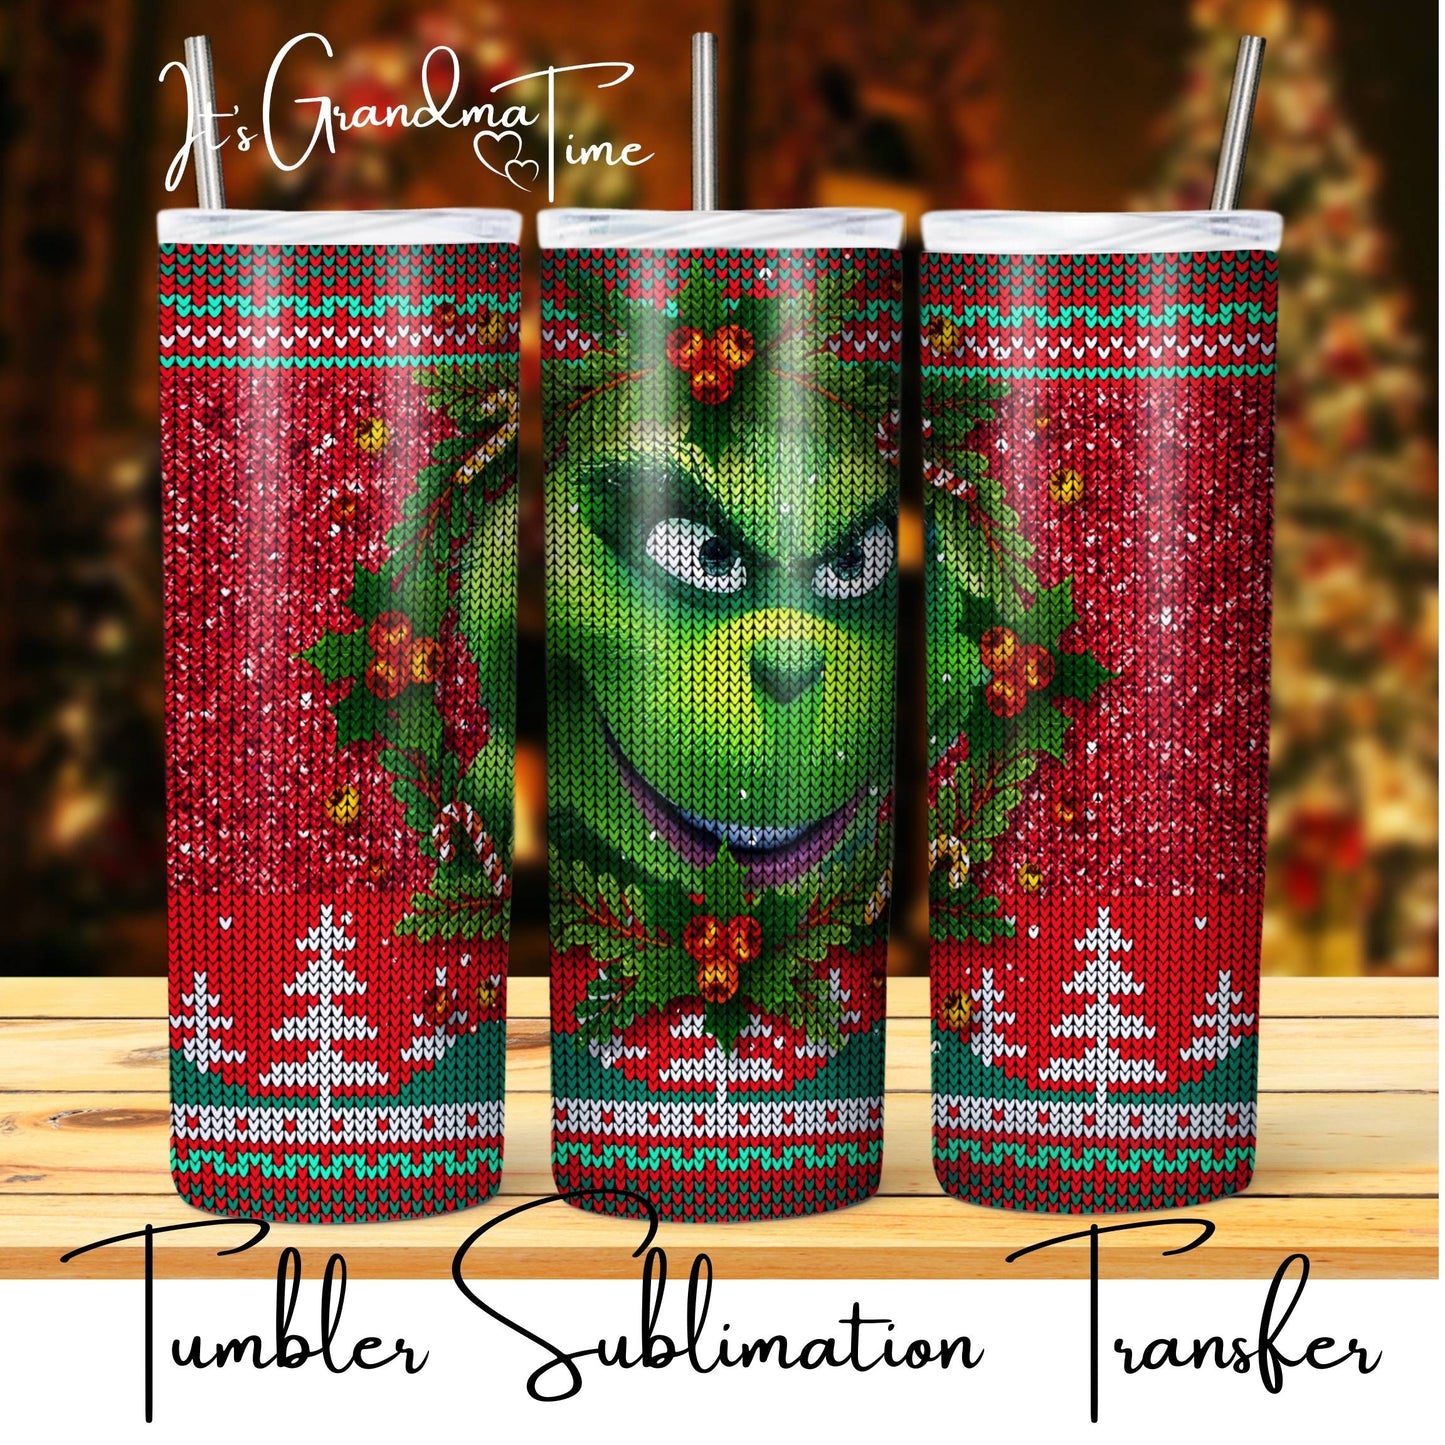 SUB2234 Christmas Sweater Grinch Tumbler Sublimation Transfer